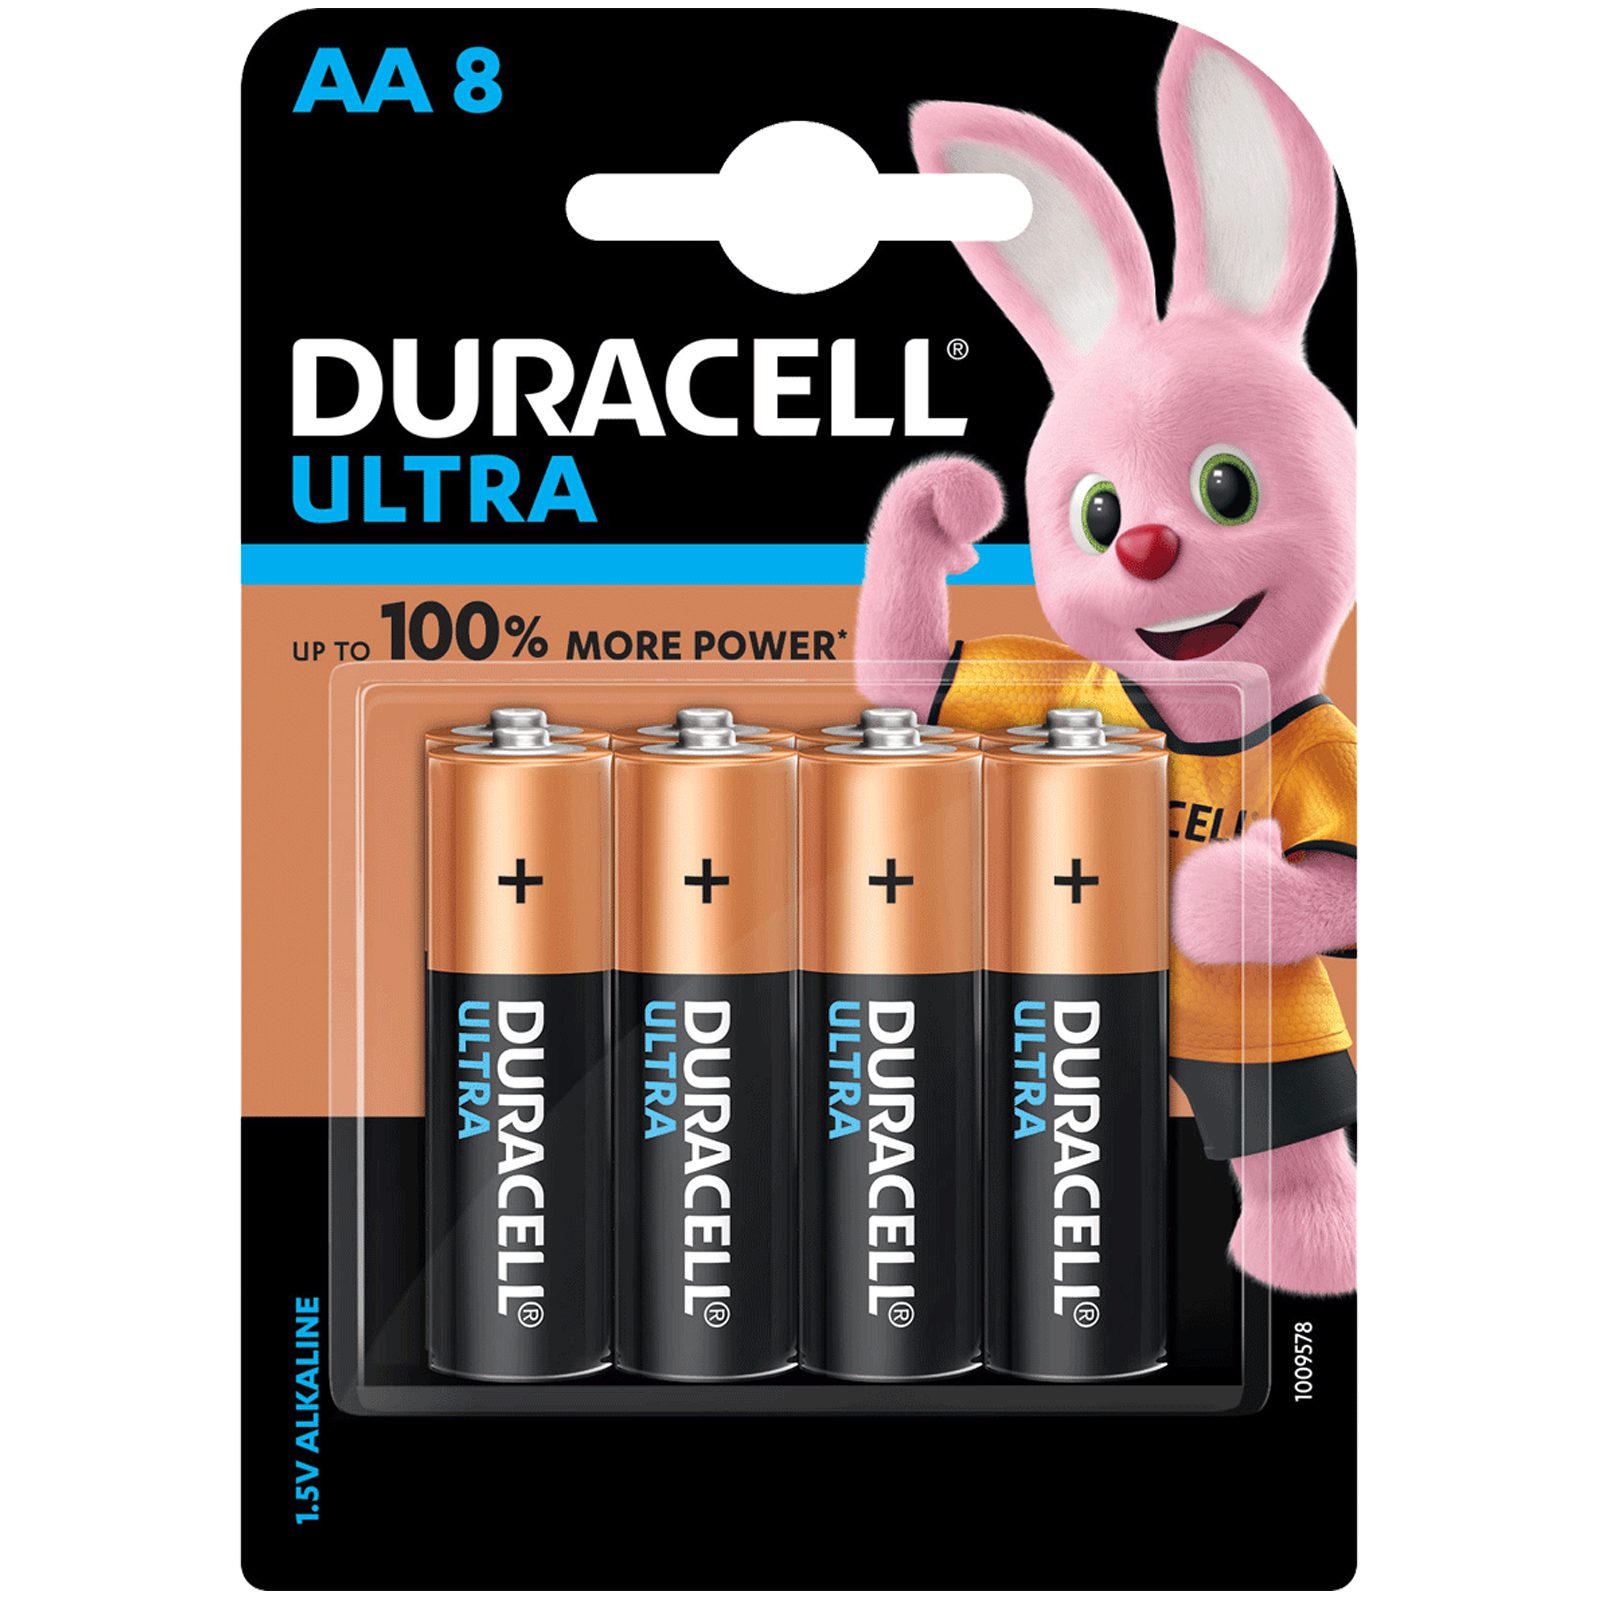 Duracell Ultra Alkaline Non Rechargeable Batteries for HP Toys, Flashlights (Operates Over Wider Range of Temperature, DU CB AL AA 8, Copper Black)_1